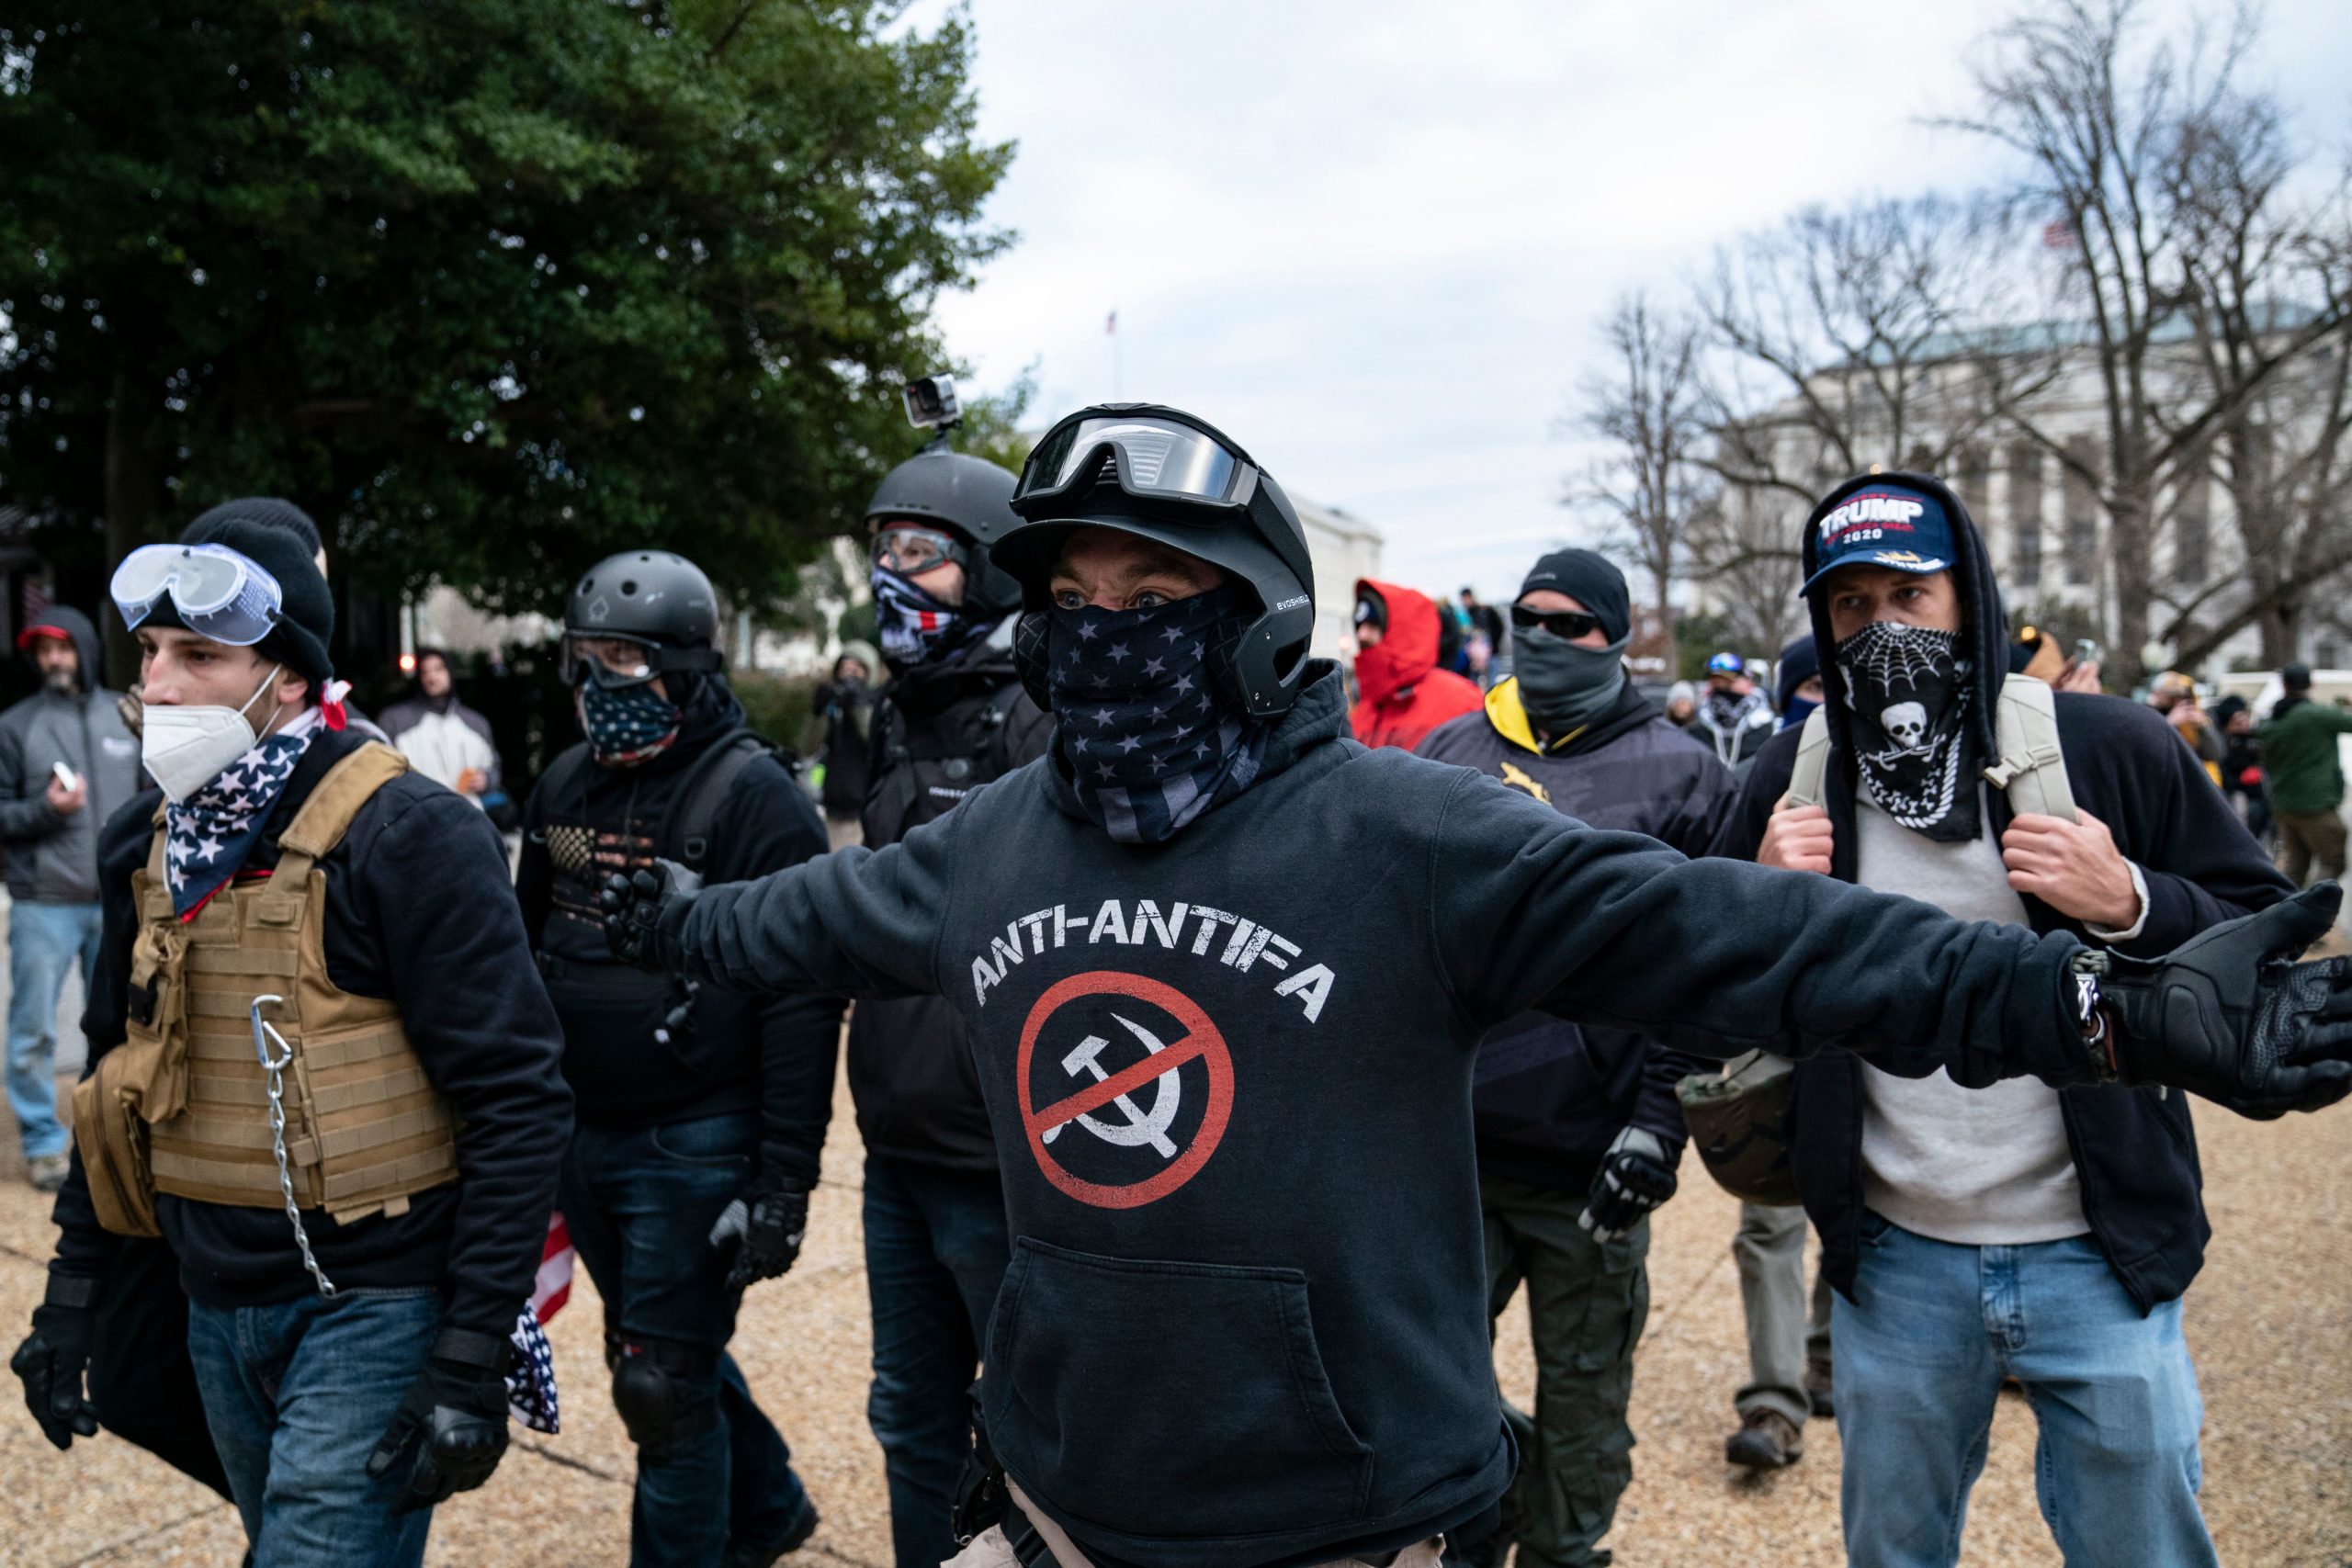 Protester who claim to be a members of the Proud Boys gather with other supporters of US President Donald Trump protest outside the US Capitol on January 6, 2021, in Washington, DC. - Demonstrators breeched security and entered the Capitol as Congress debated the a 2020 presidential election Electoral Vote Certification. (Photo by ALEX EDELMAN / AFP) (Photo by ALEX EDELMAN/AFP via Getty Images)